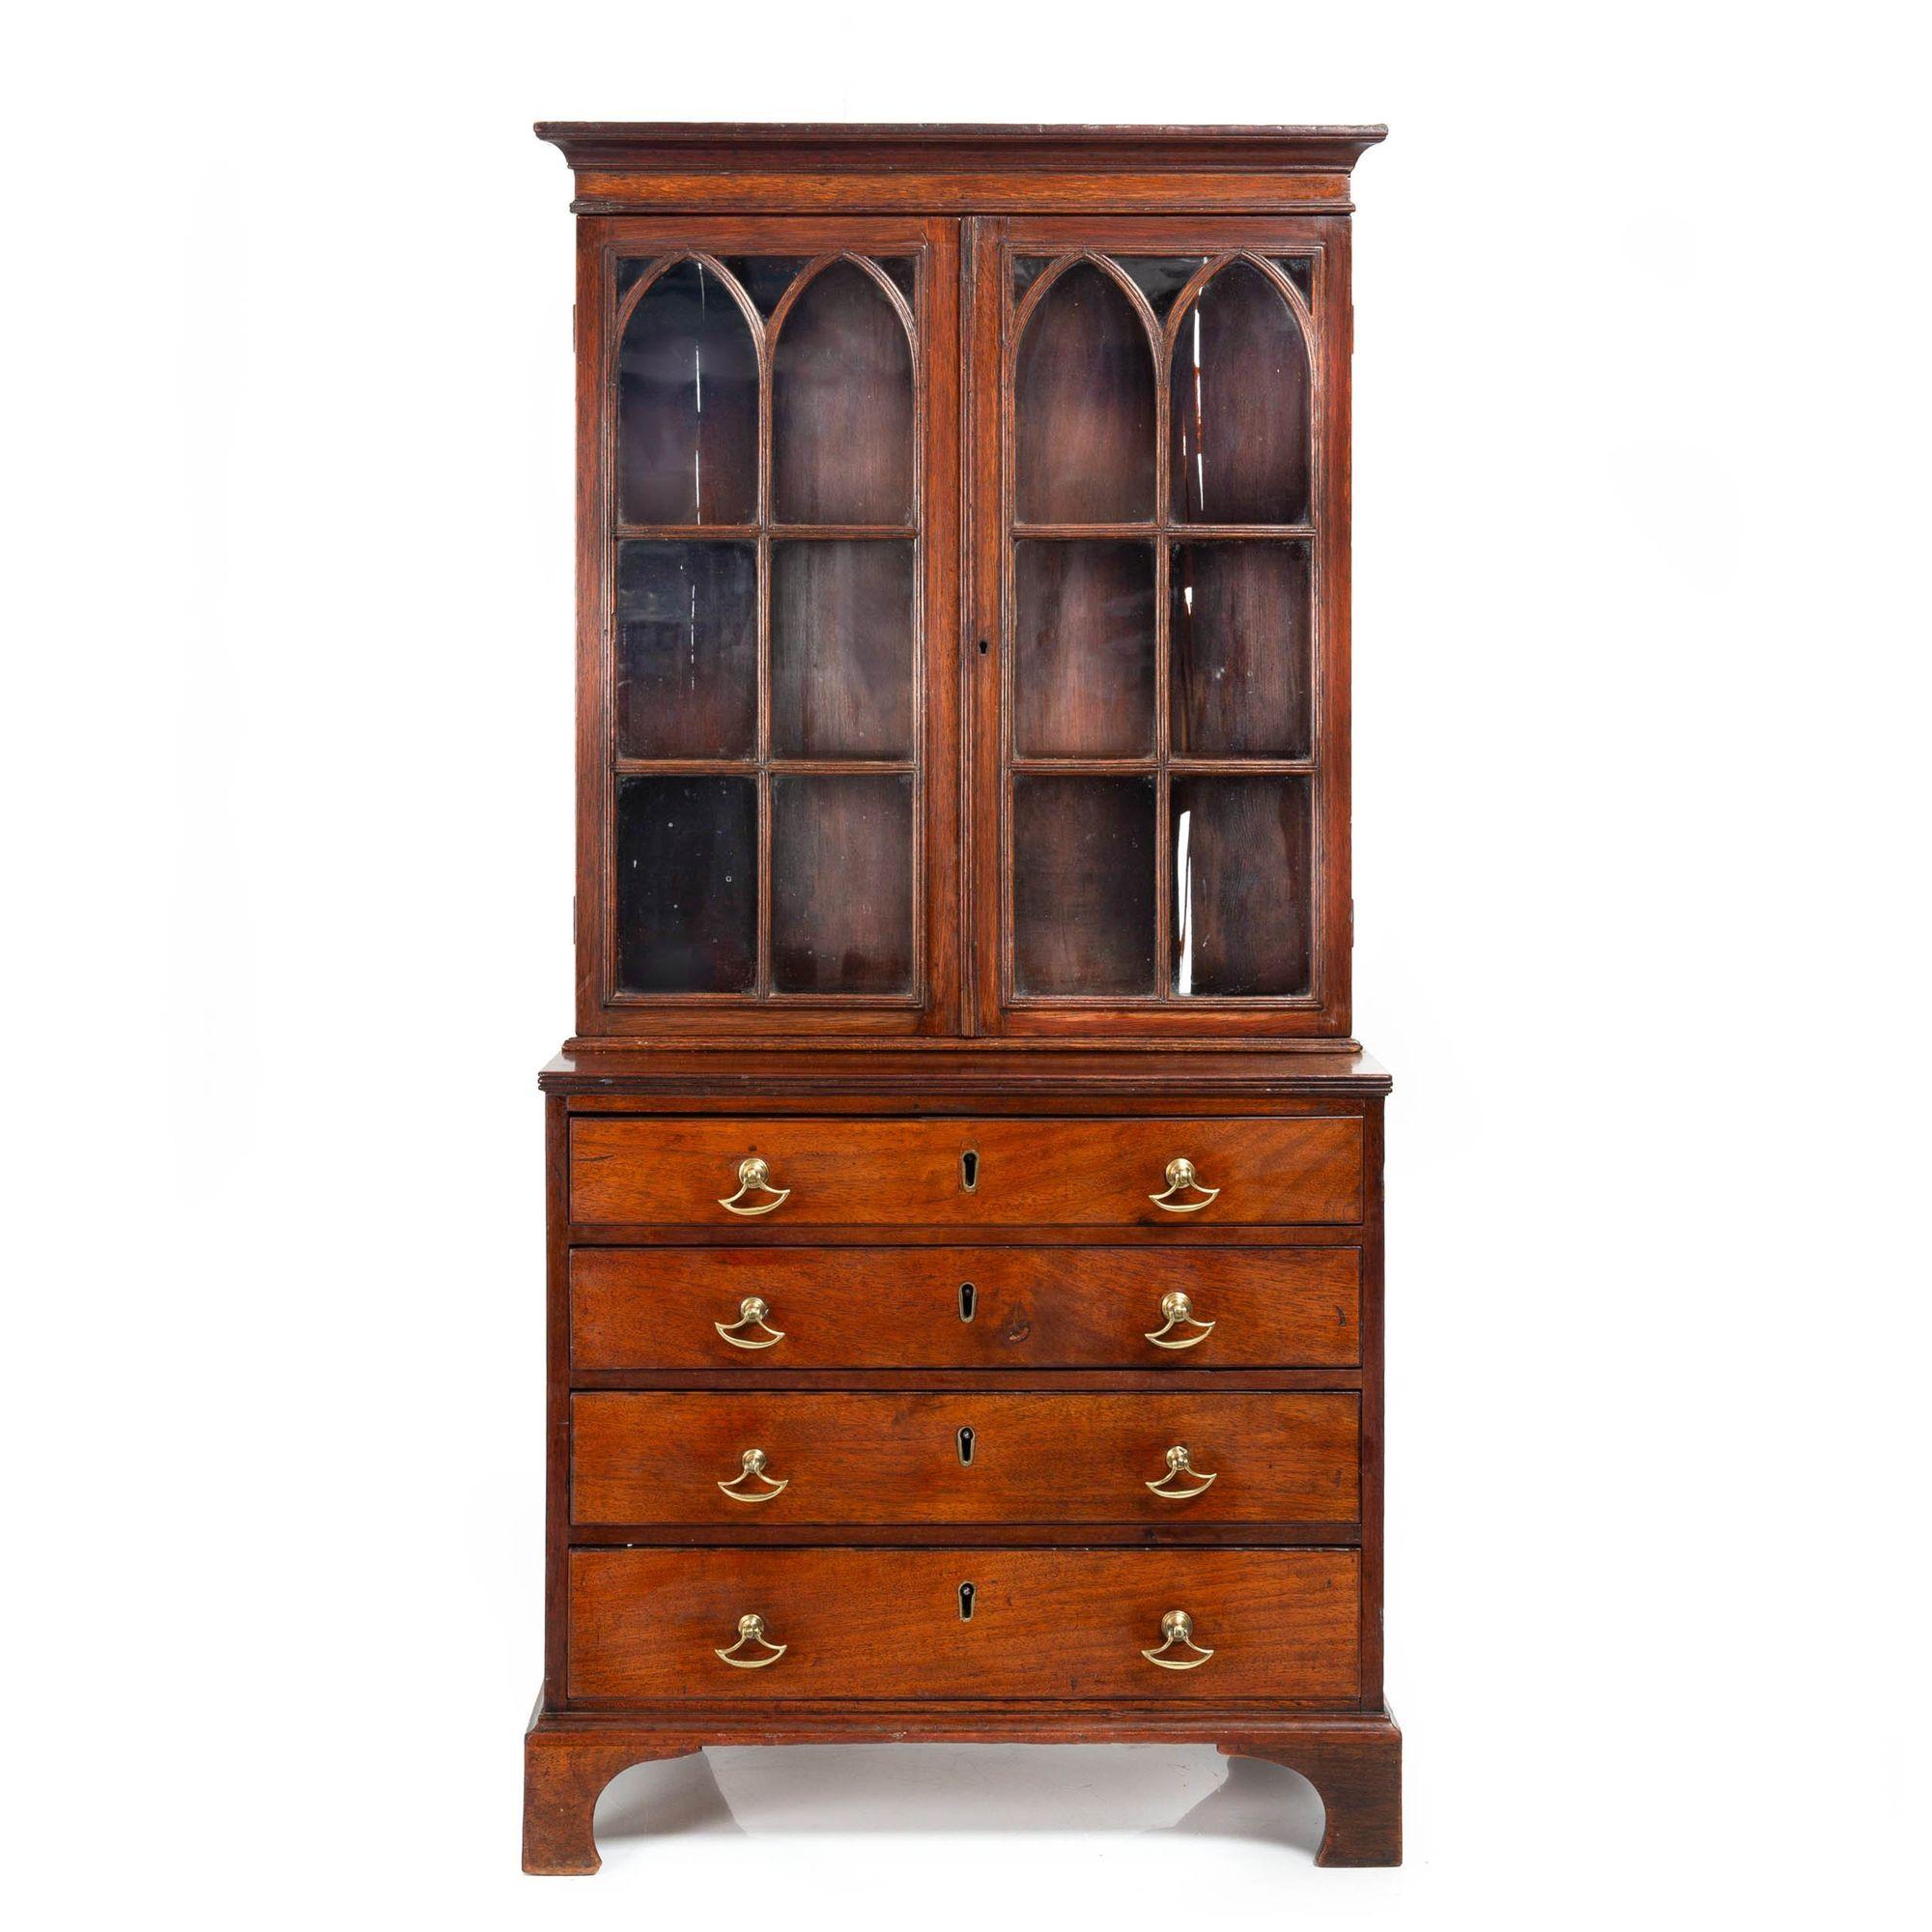 RARE AND VERY FINE MINIATURE GEORGE III MAHOGANY TWO-PART BOOKCASE OVER CHEST
Of Child-Like Dimensions  England, circa 1800
Item # 403TYP02X

A rare and very fine George III mahogany miniature two-part bookcase, the example was probably a salesman's